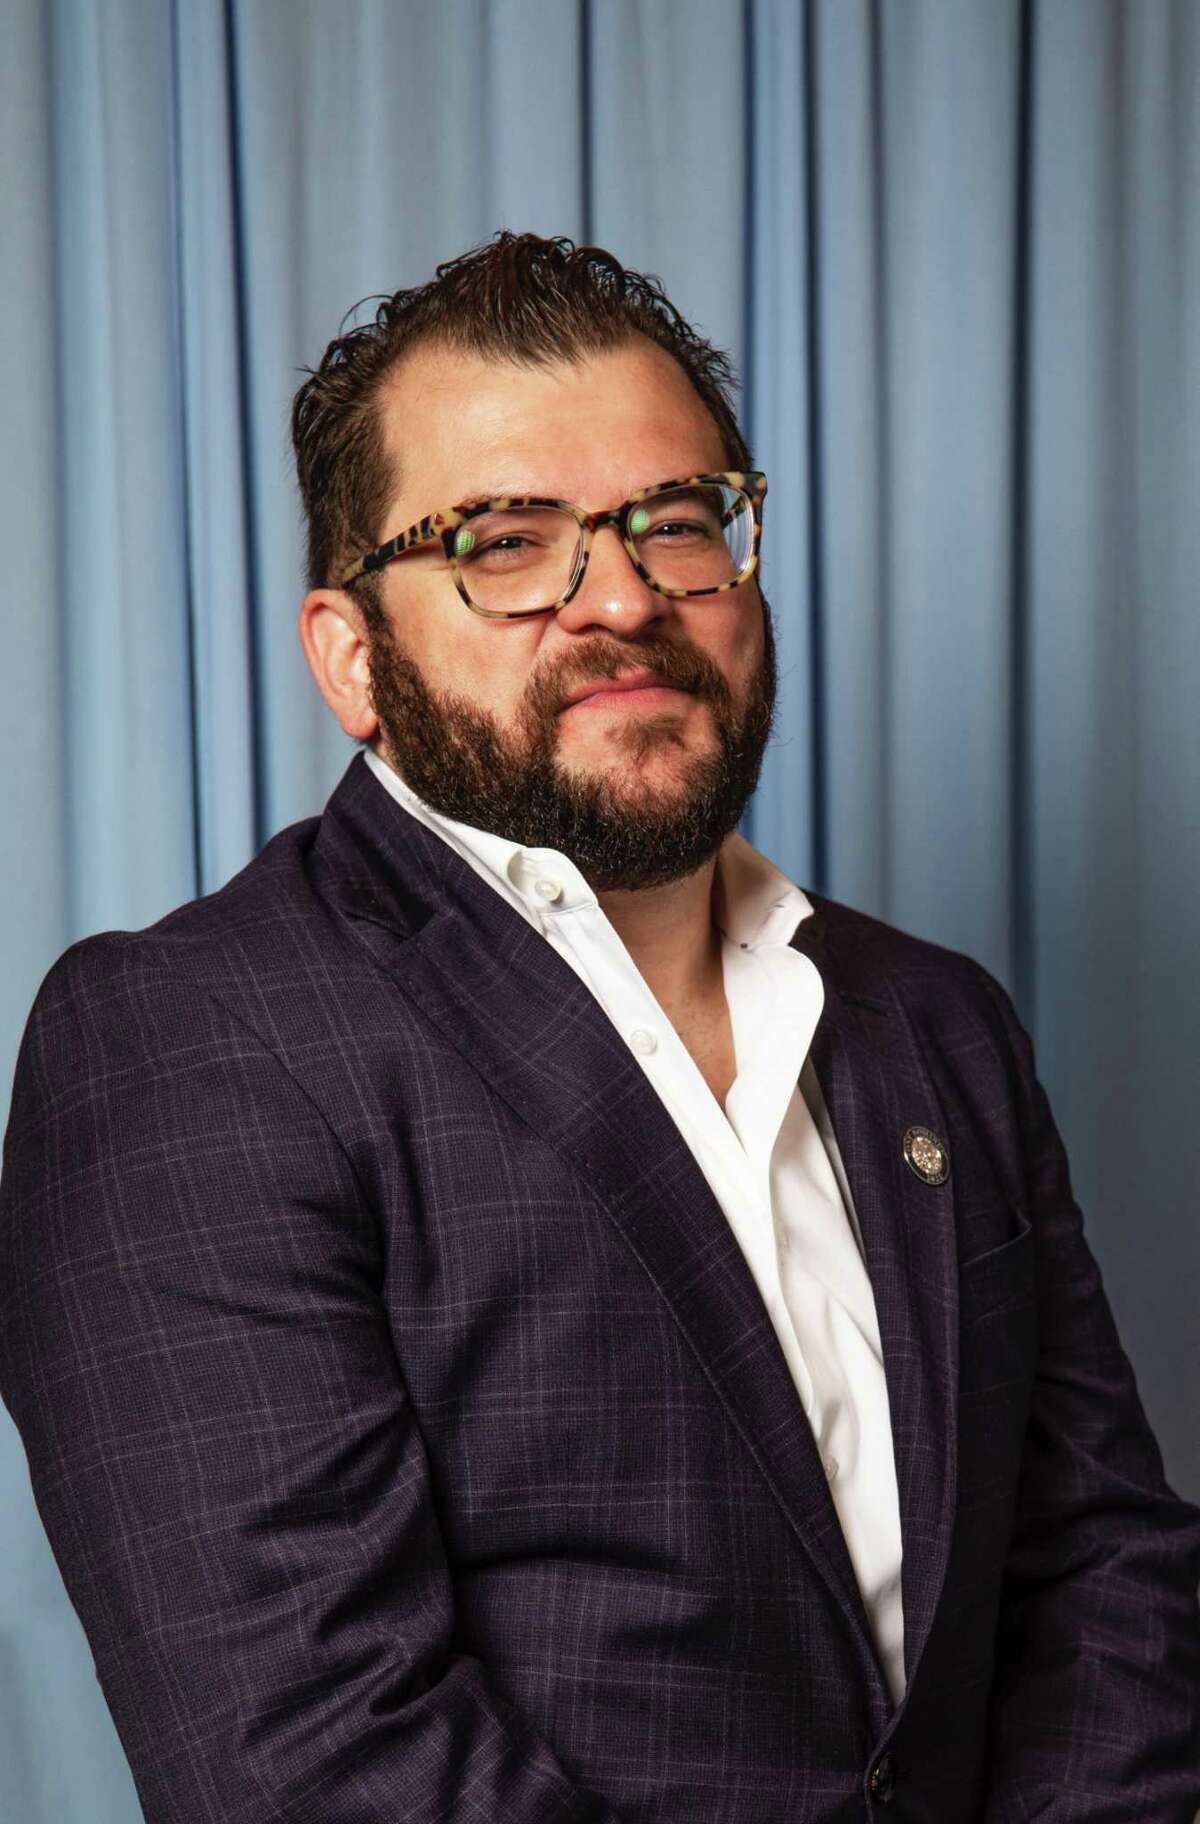 Arnulfo Maldonado, an alumnus of the University of the Incarnate Word in San Antonio, was nominated for a Tony Award for scenic design for the musical "A Strange Loop."